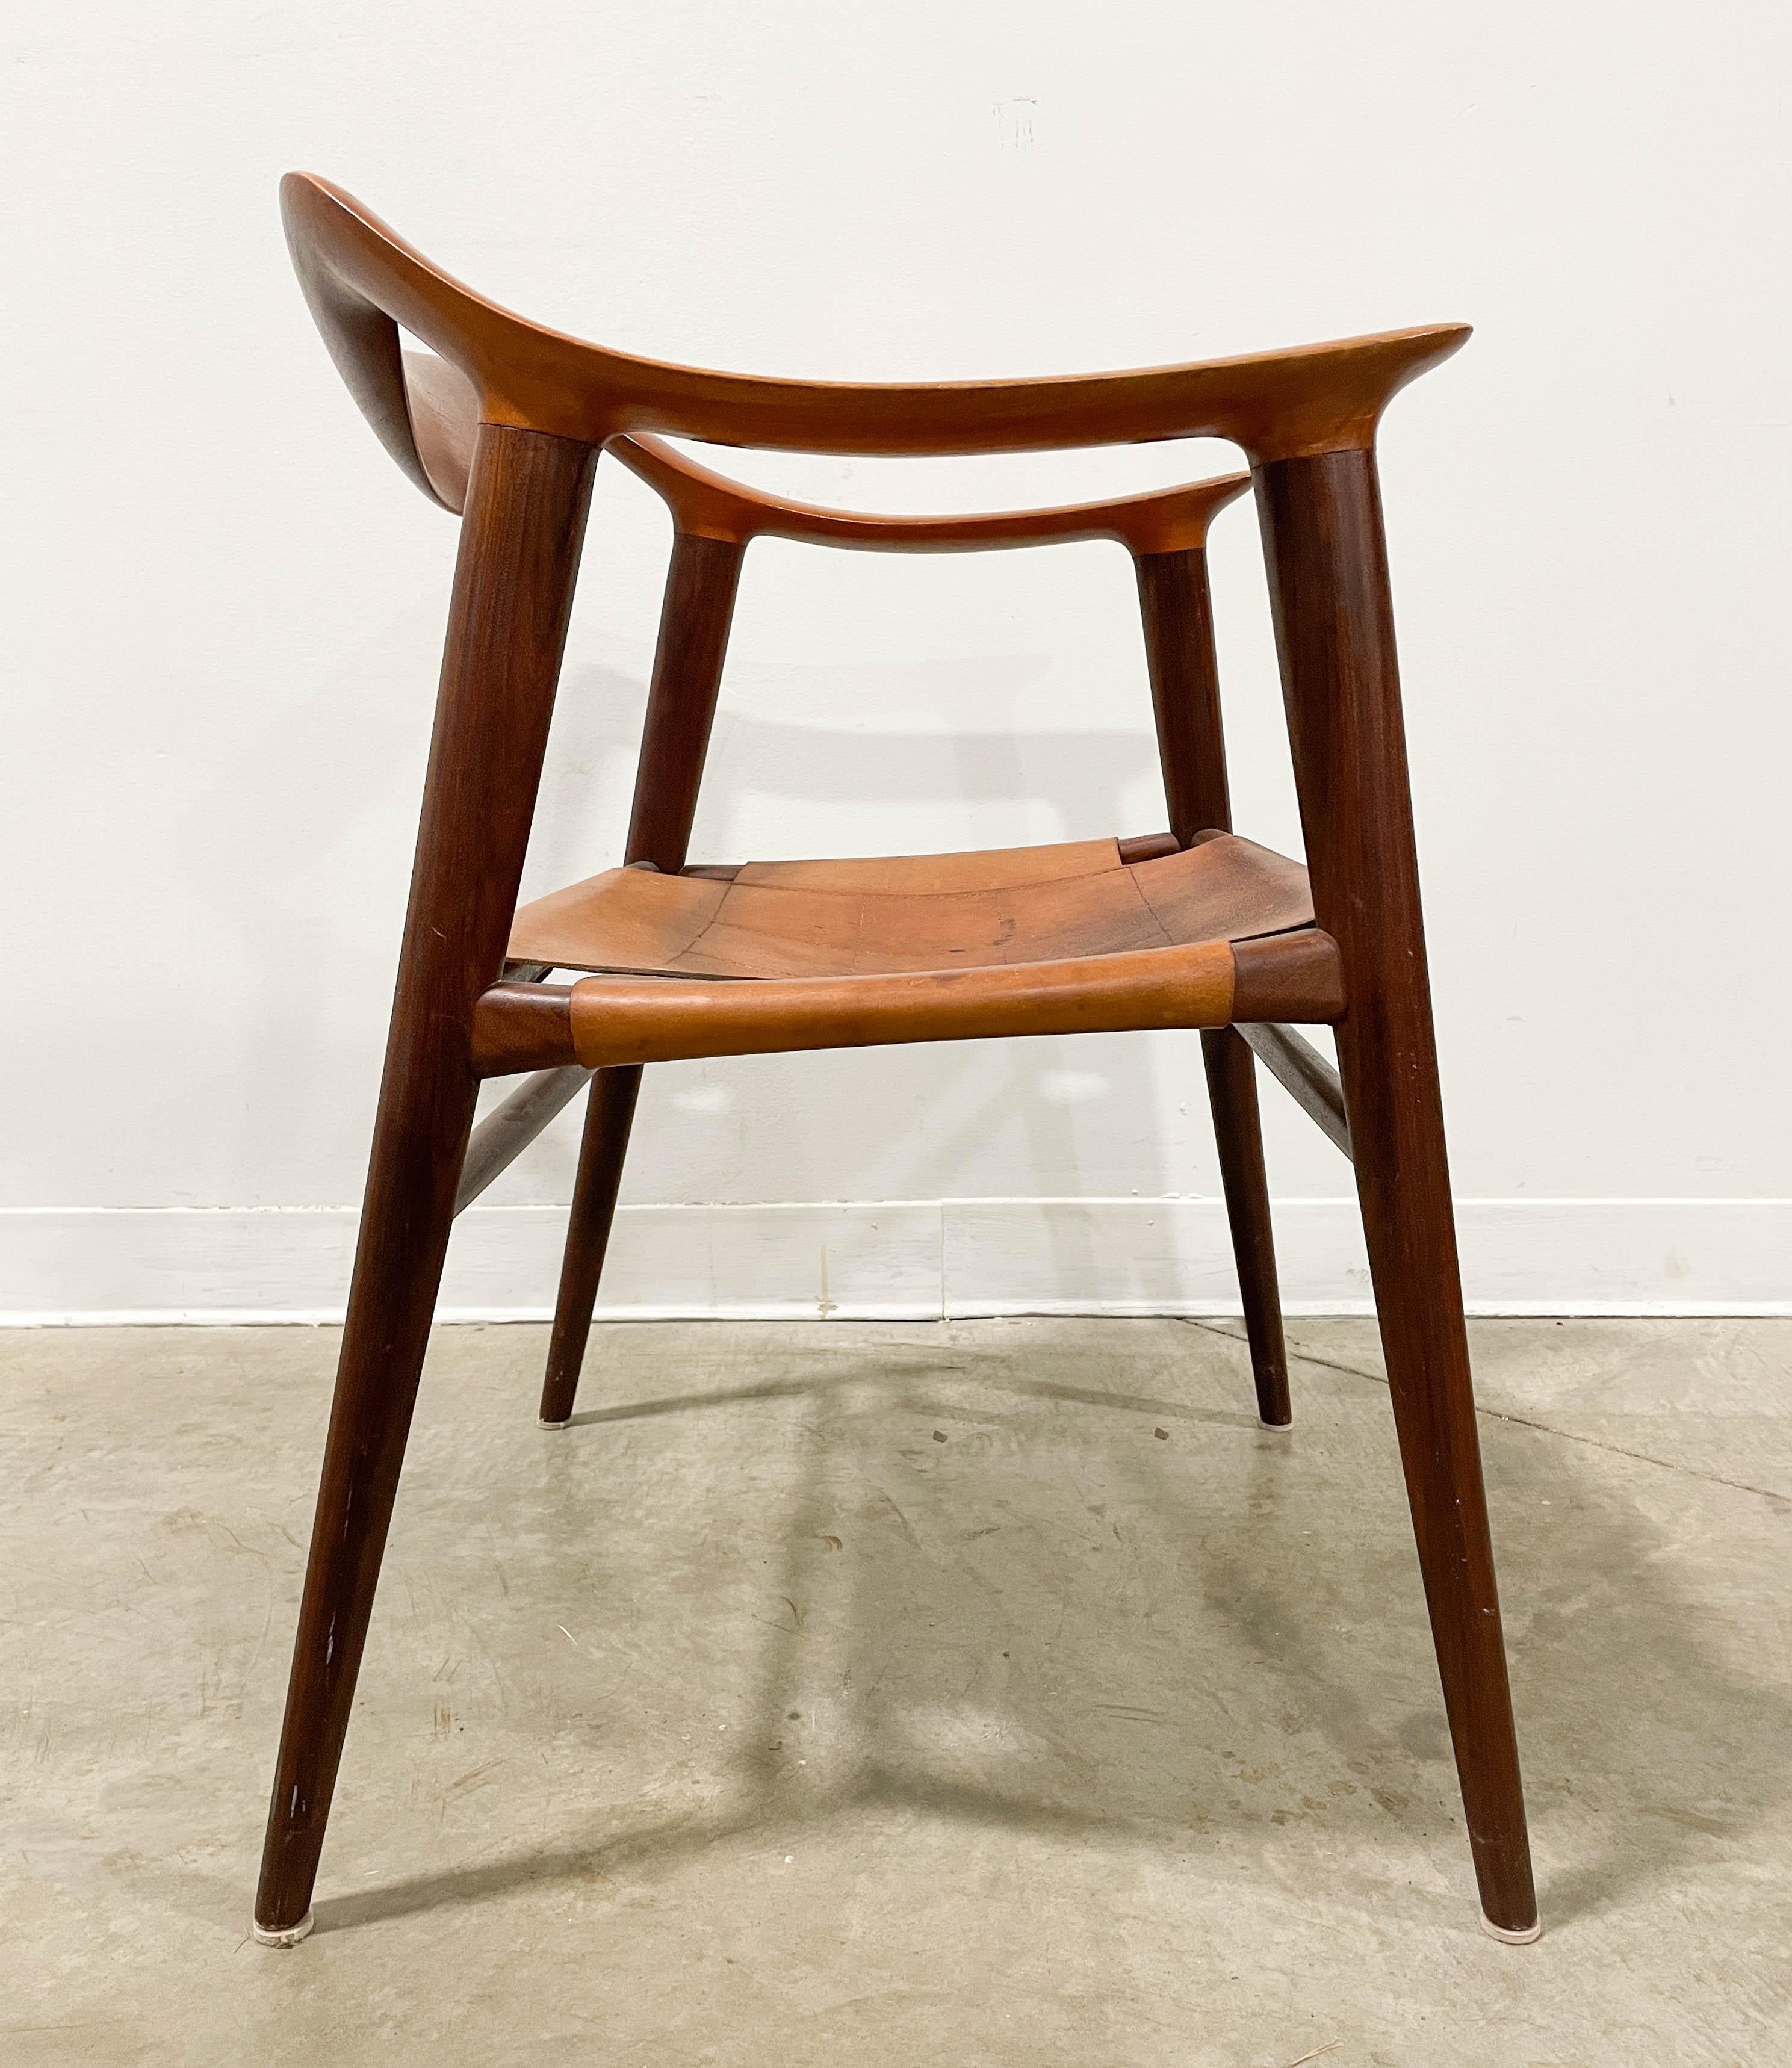 Crafted from teak and leather, this Bambi Chair designed by Rolf Rastad & Adolf Relling was manufactured by Gustav Bahus in Norway in the 1950s. The unique chair features superb joinery and a lightweight design. The original leather is in good